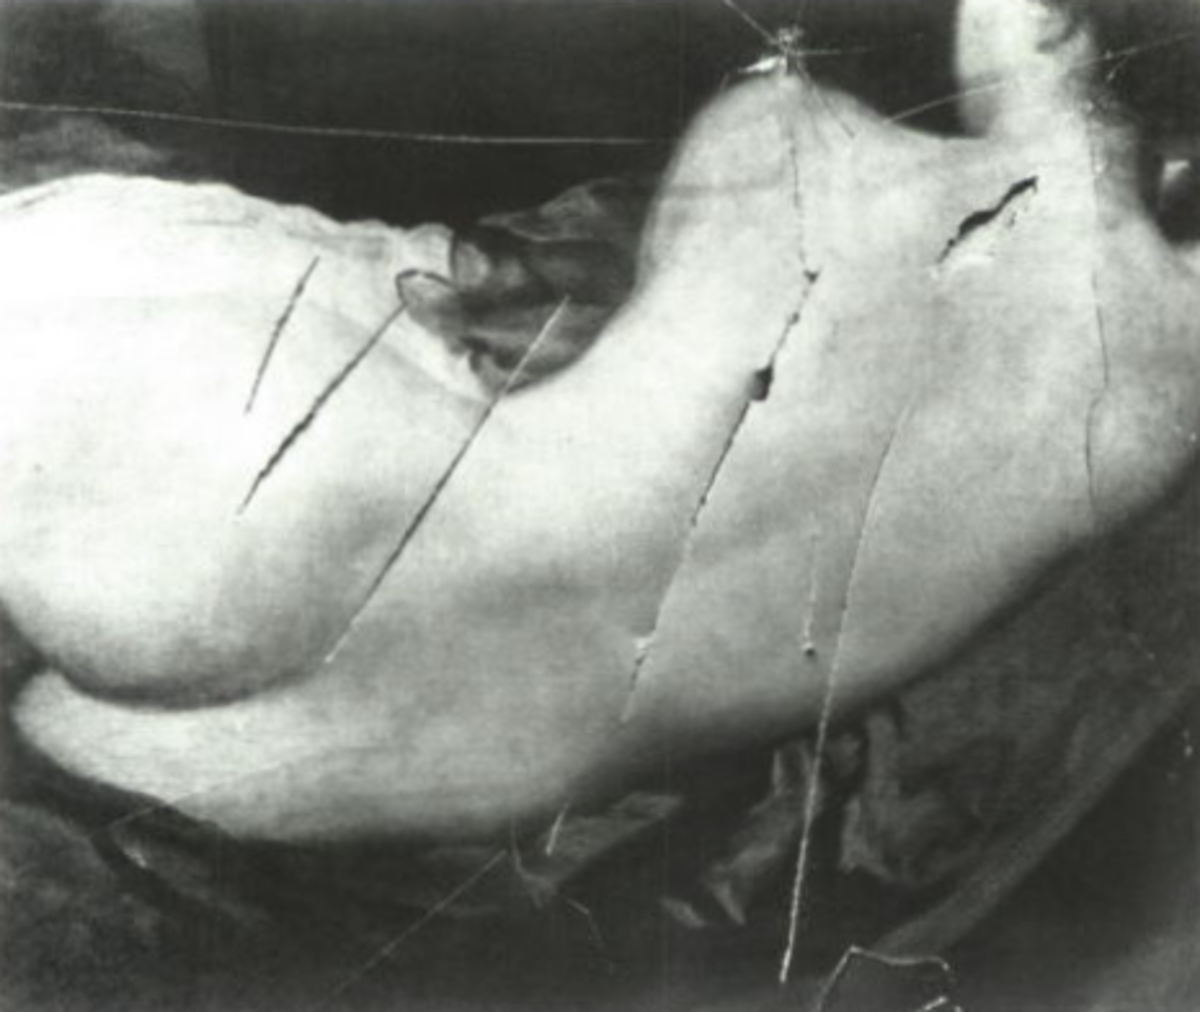 The slashes cut by suffragette Mary Richardson in 1914 on Velazquez' "Rokeby Venus," while hanging at the National Gallery, London.